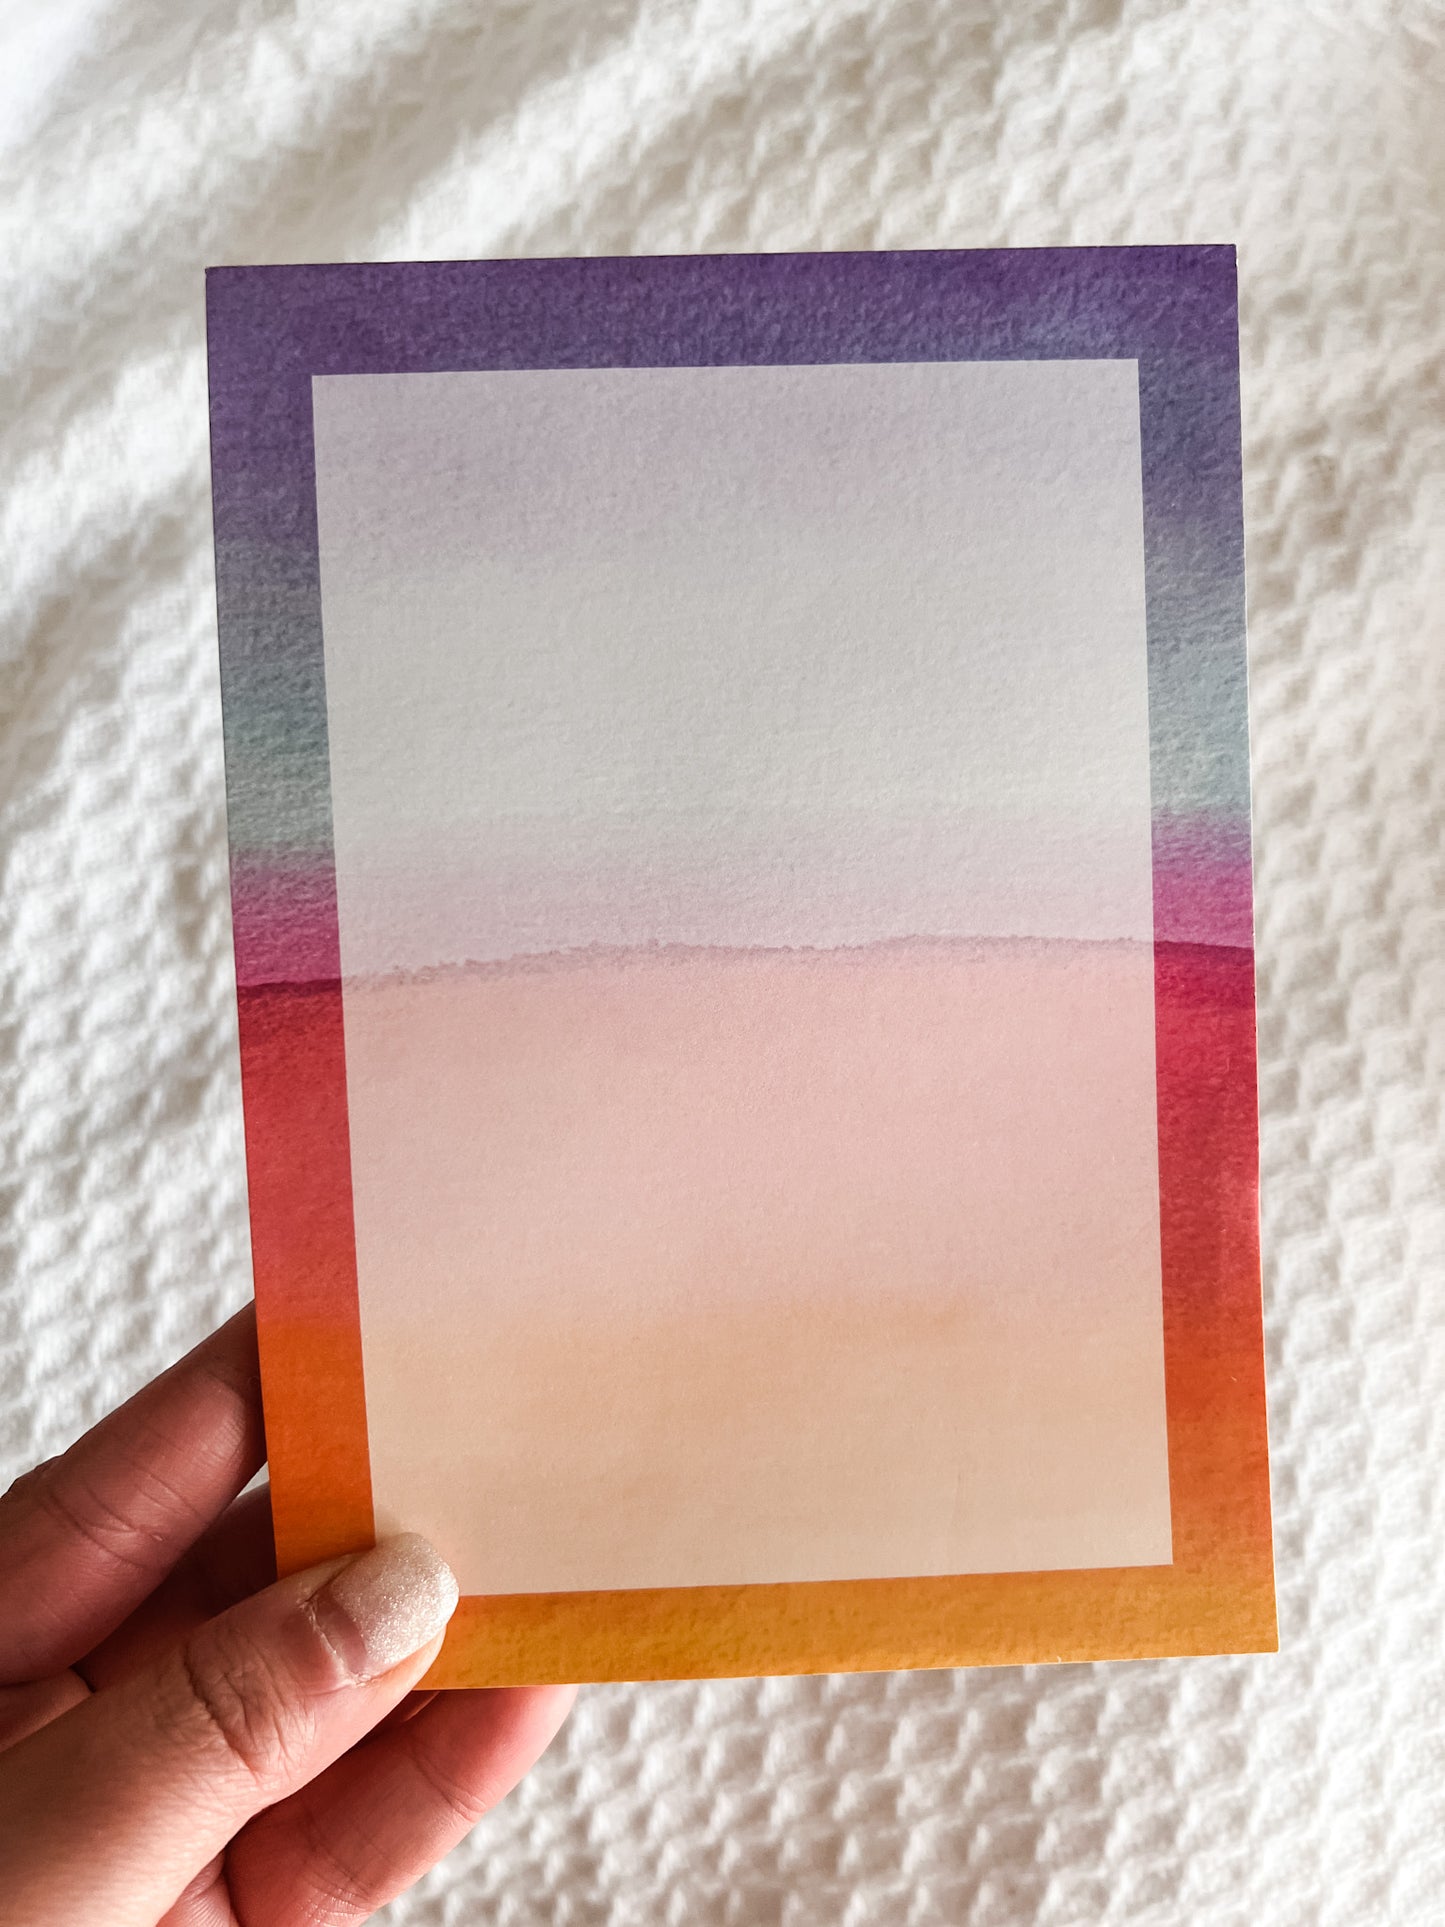 Sunset Watercolor Notepad